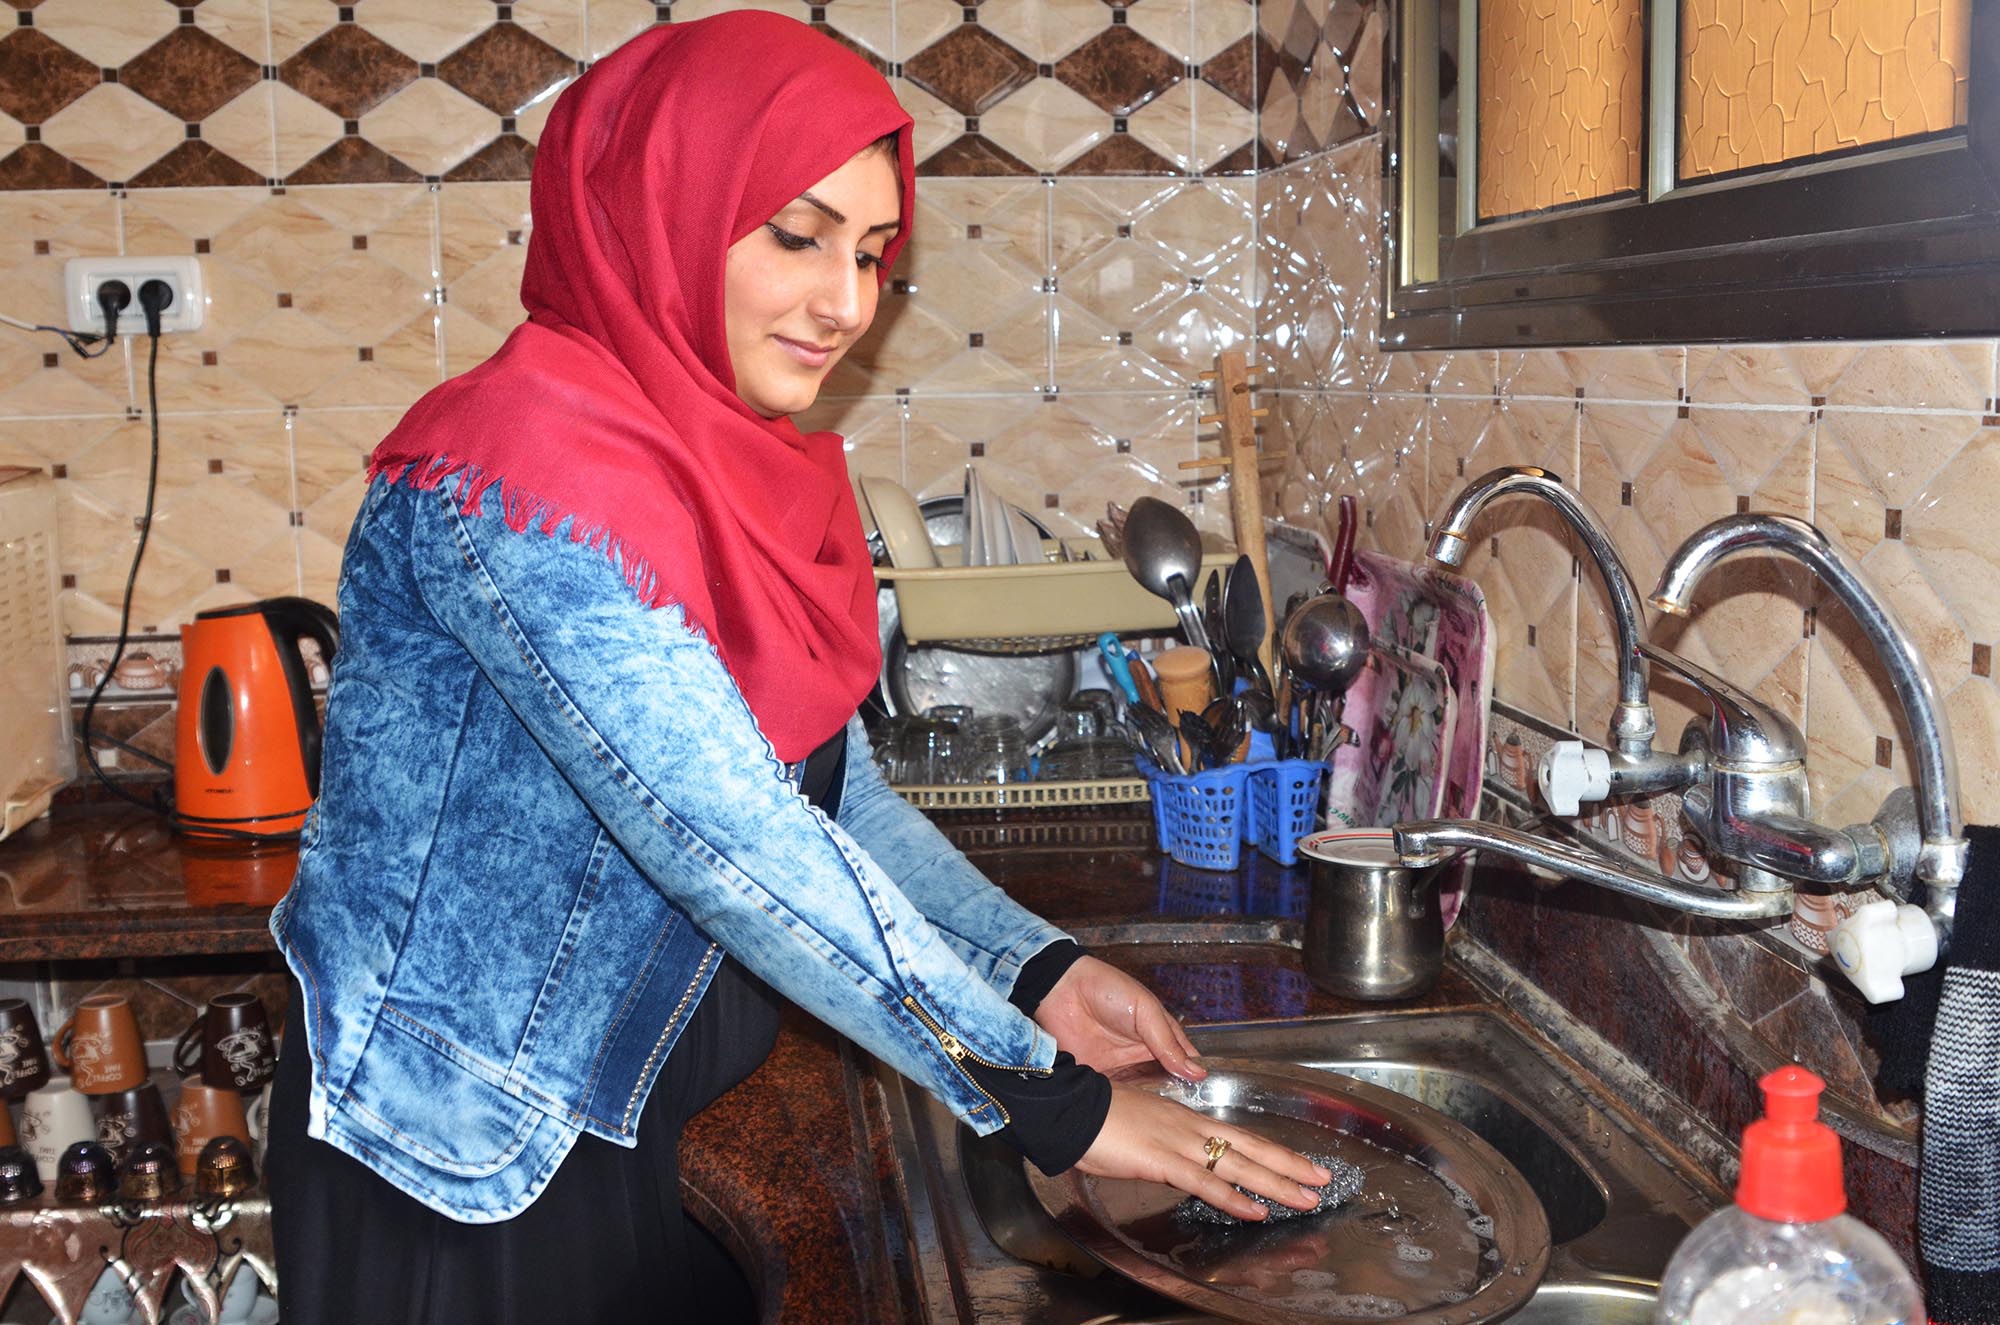 A Palestinian woman uses tap water from the rehabilitated water well in Beit Hanoun